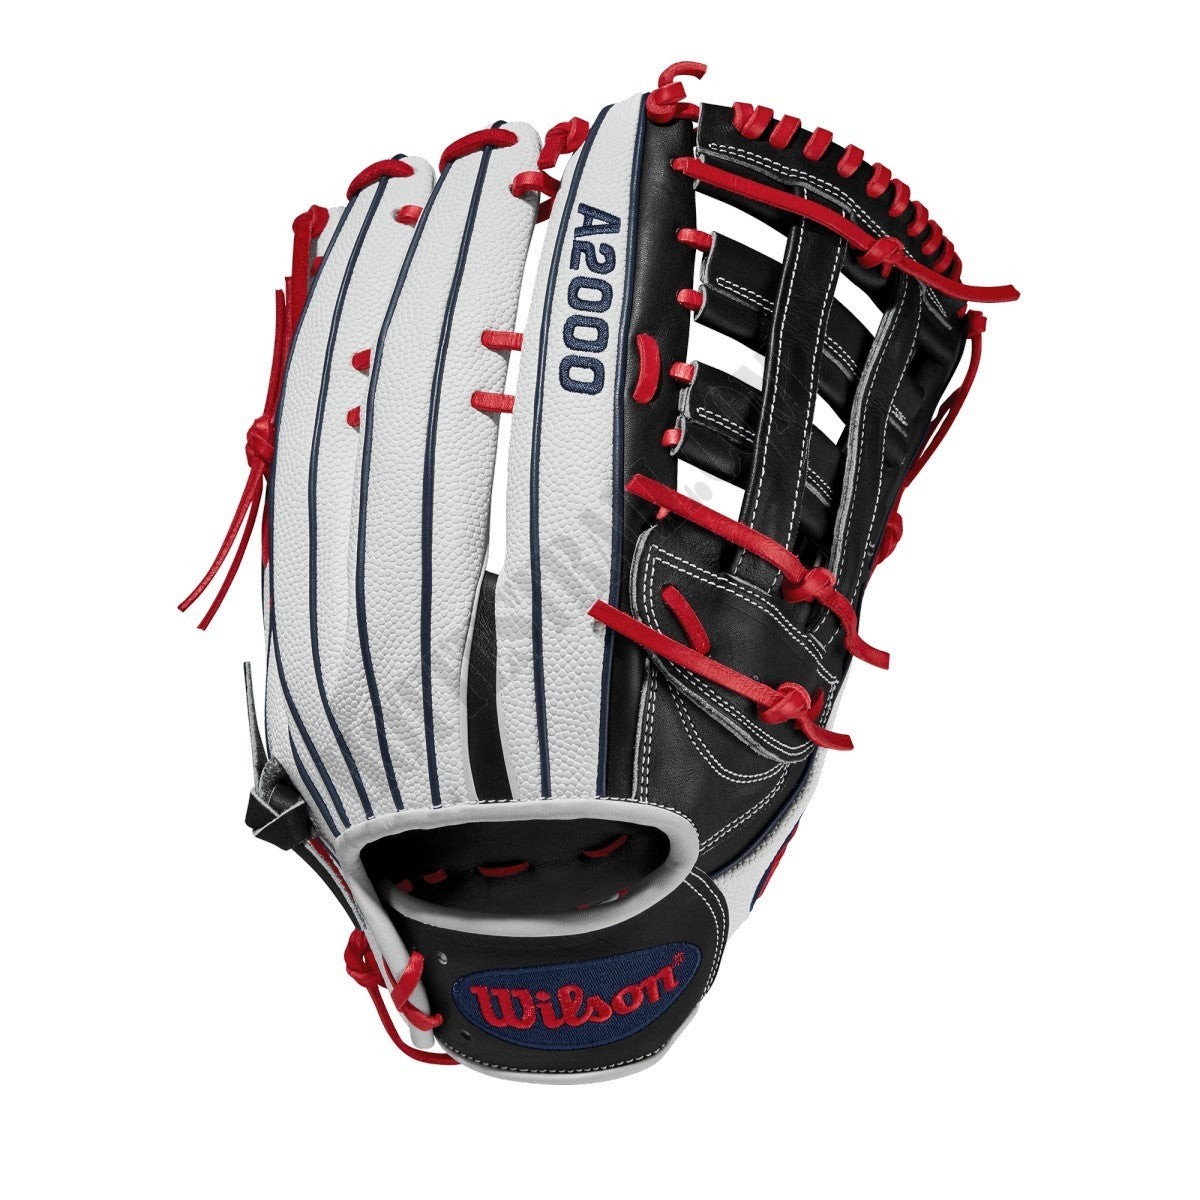 2020 A2000 SP135 13.5" Slowpitch Softball Glove ● Wilson Promotions - -1